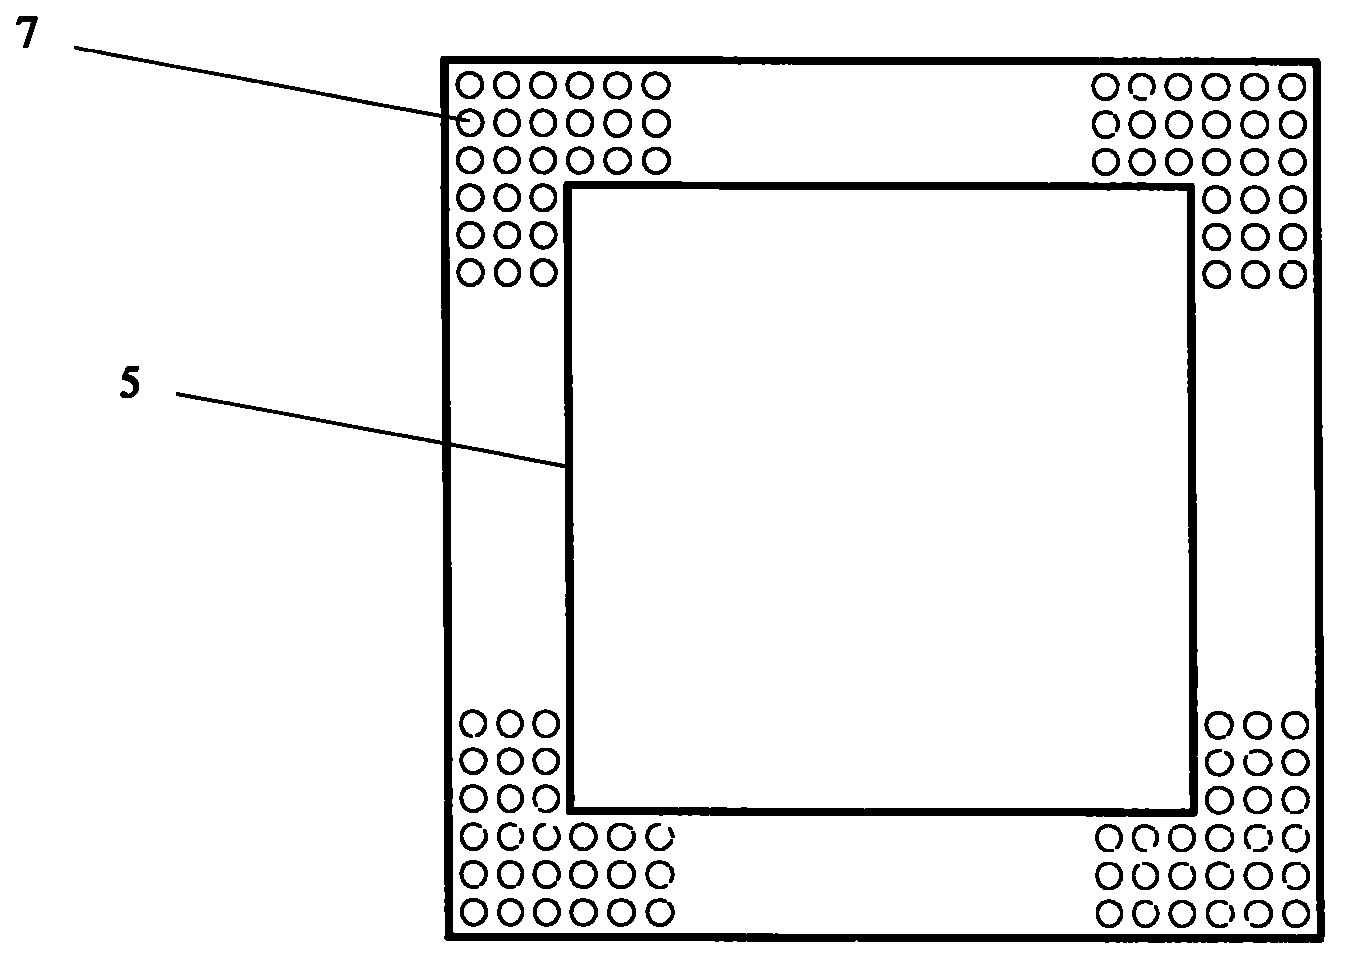 Laminated 3D-MCM (3-dimensional multiple chip module) structure based on peripheral vertical interconnect technology